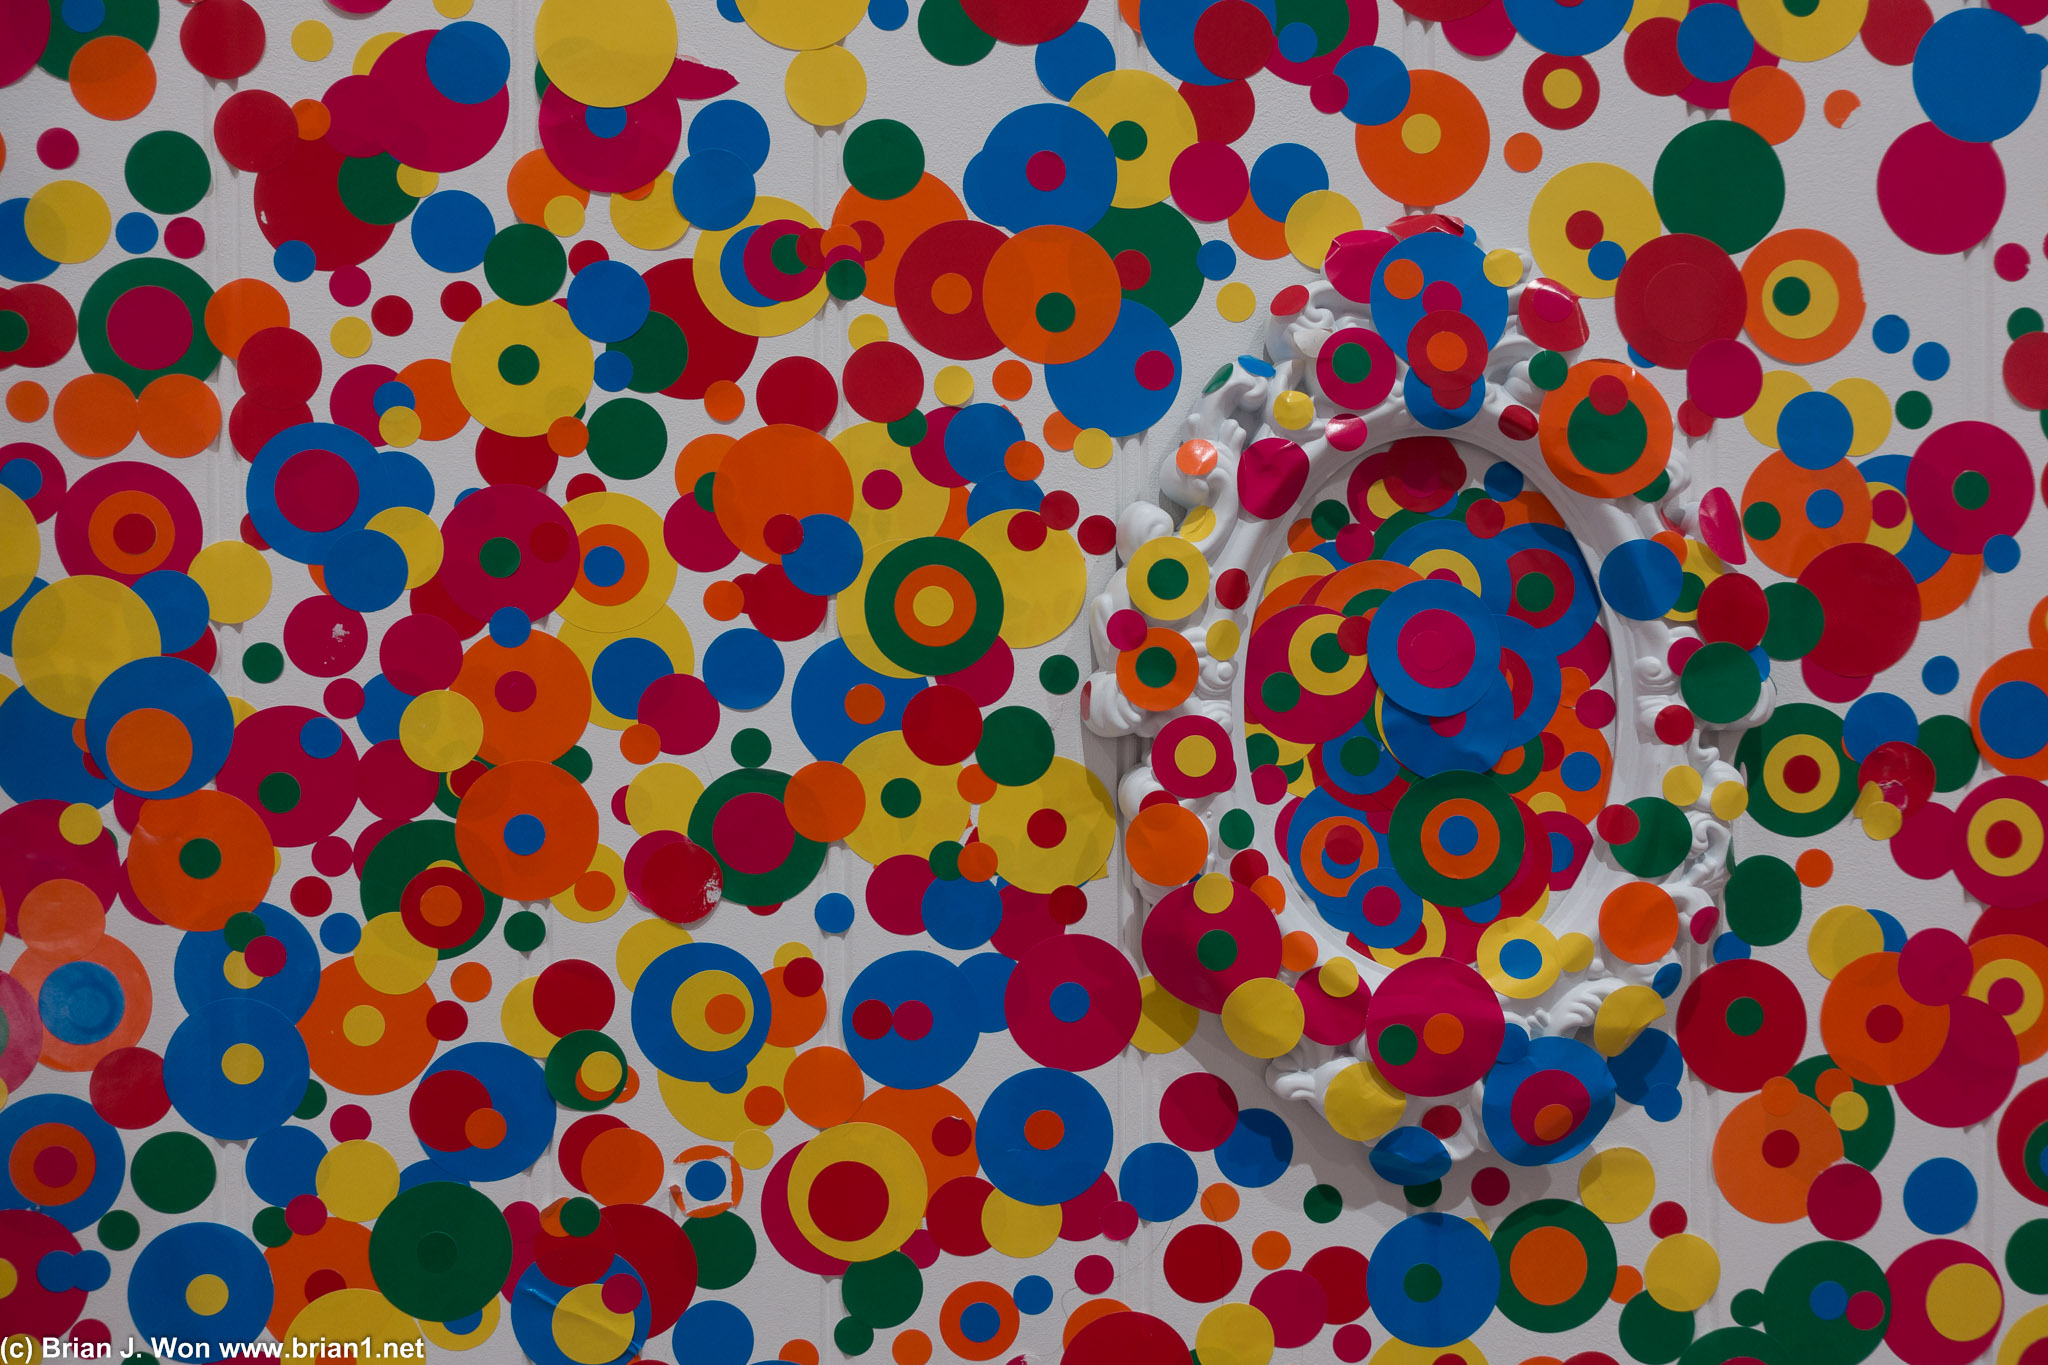 The Obliteration Room.